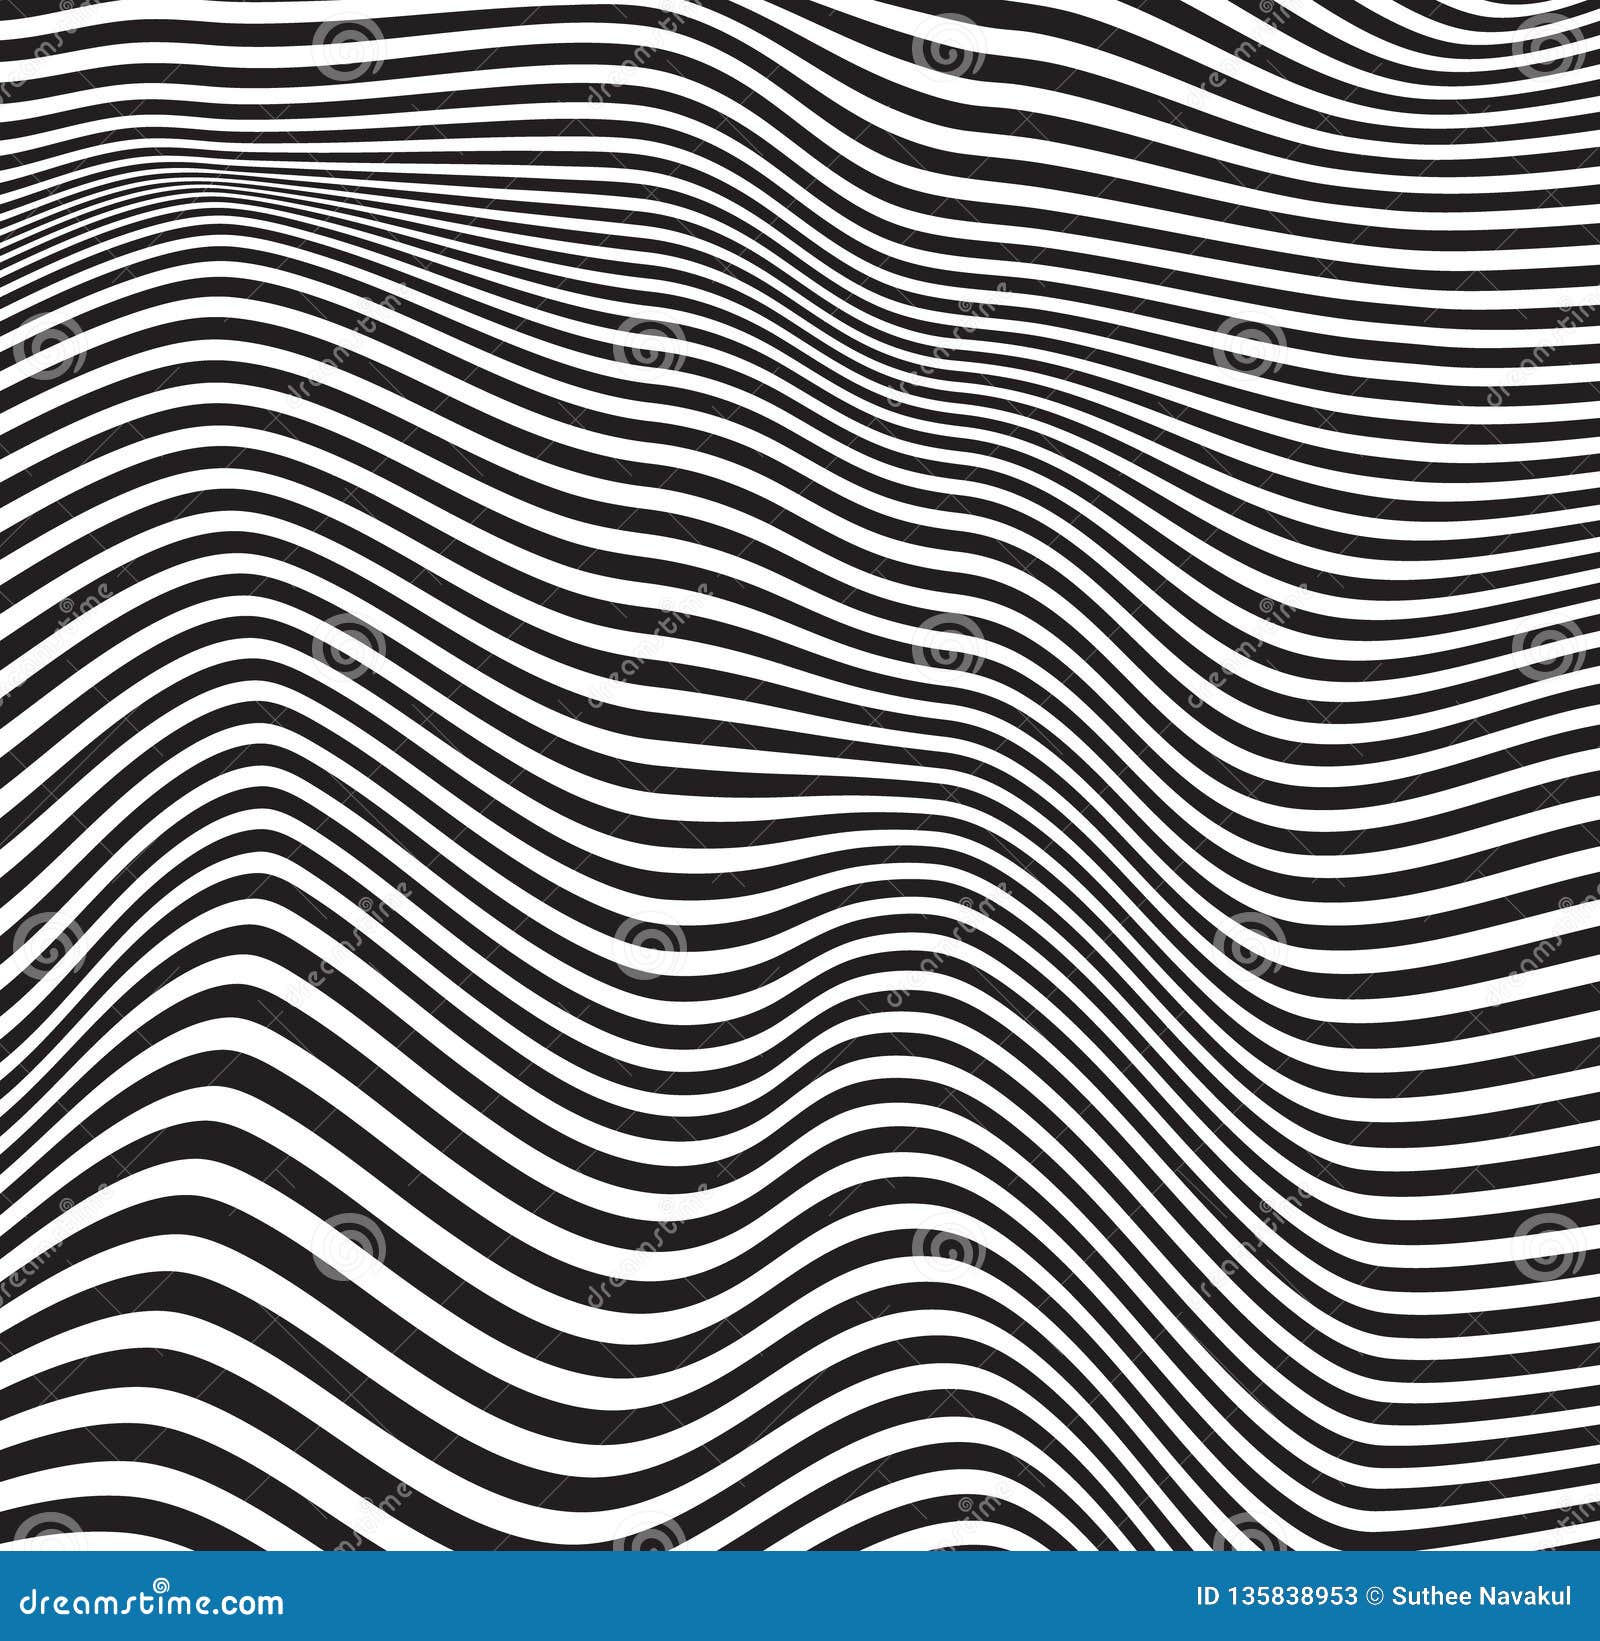 Abstract Background With Wavy Line Wave Stripe Wallpaper Black And White Background Of Wave Line Stock Illustration Illustration Of Ripple Decoration